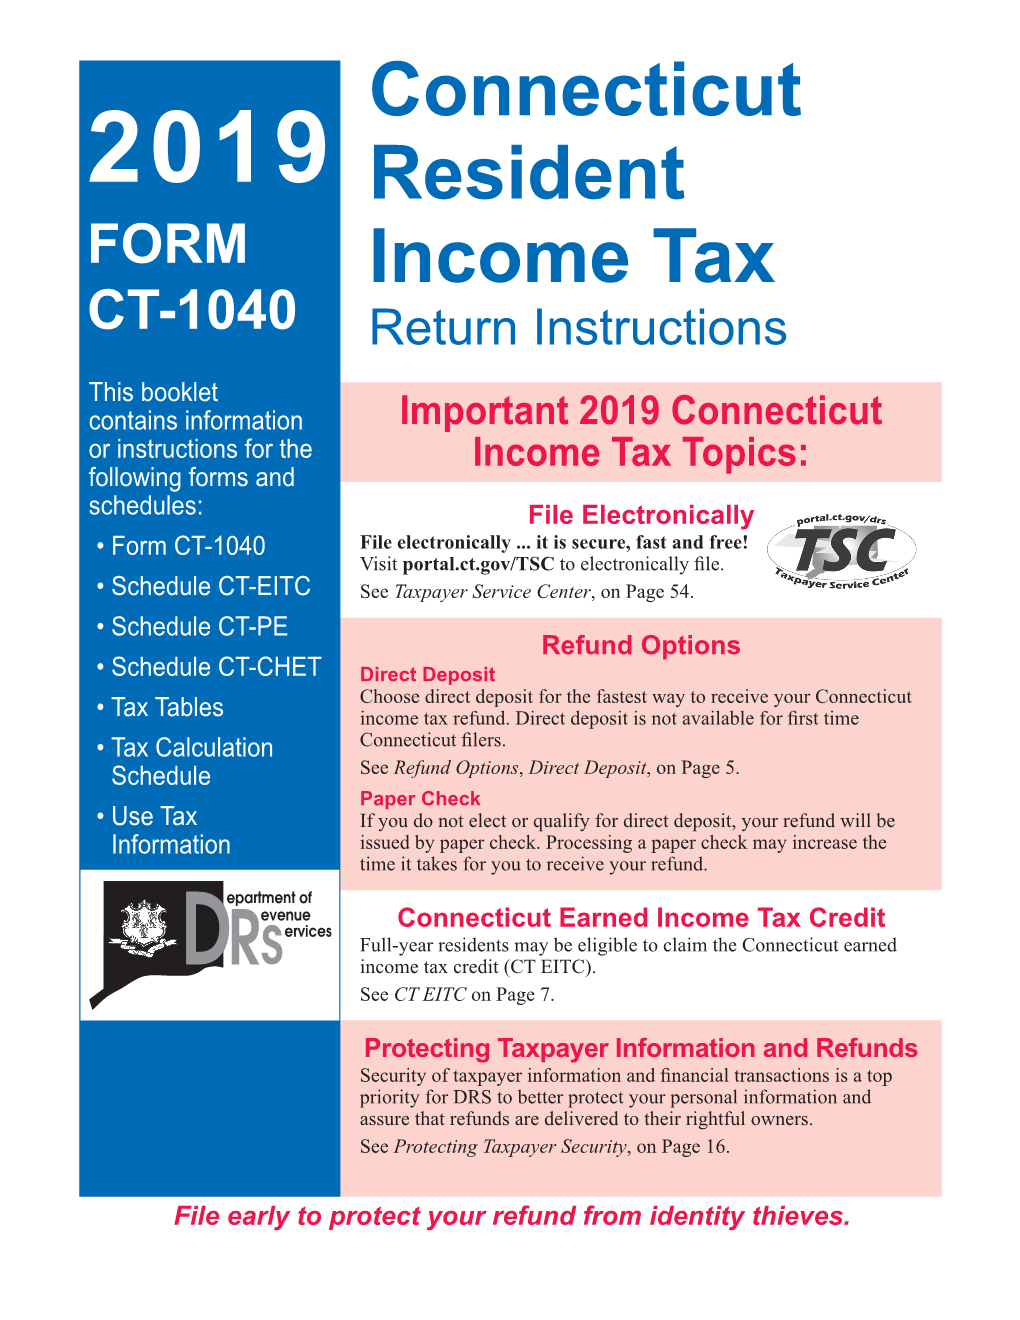 Connecticut Resident Income Tax Return Instructions